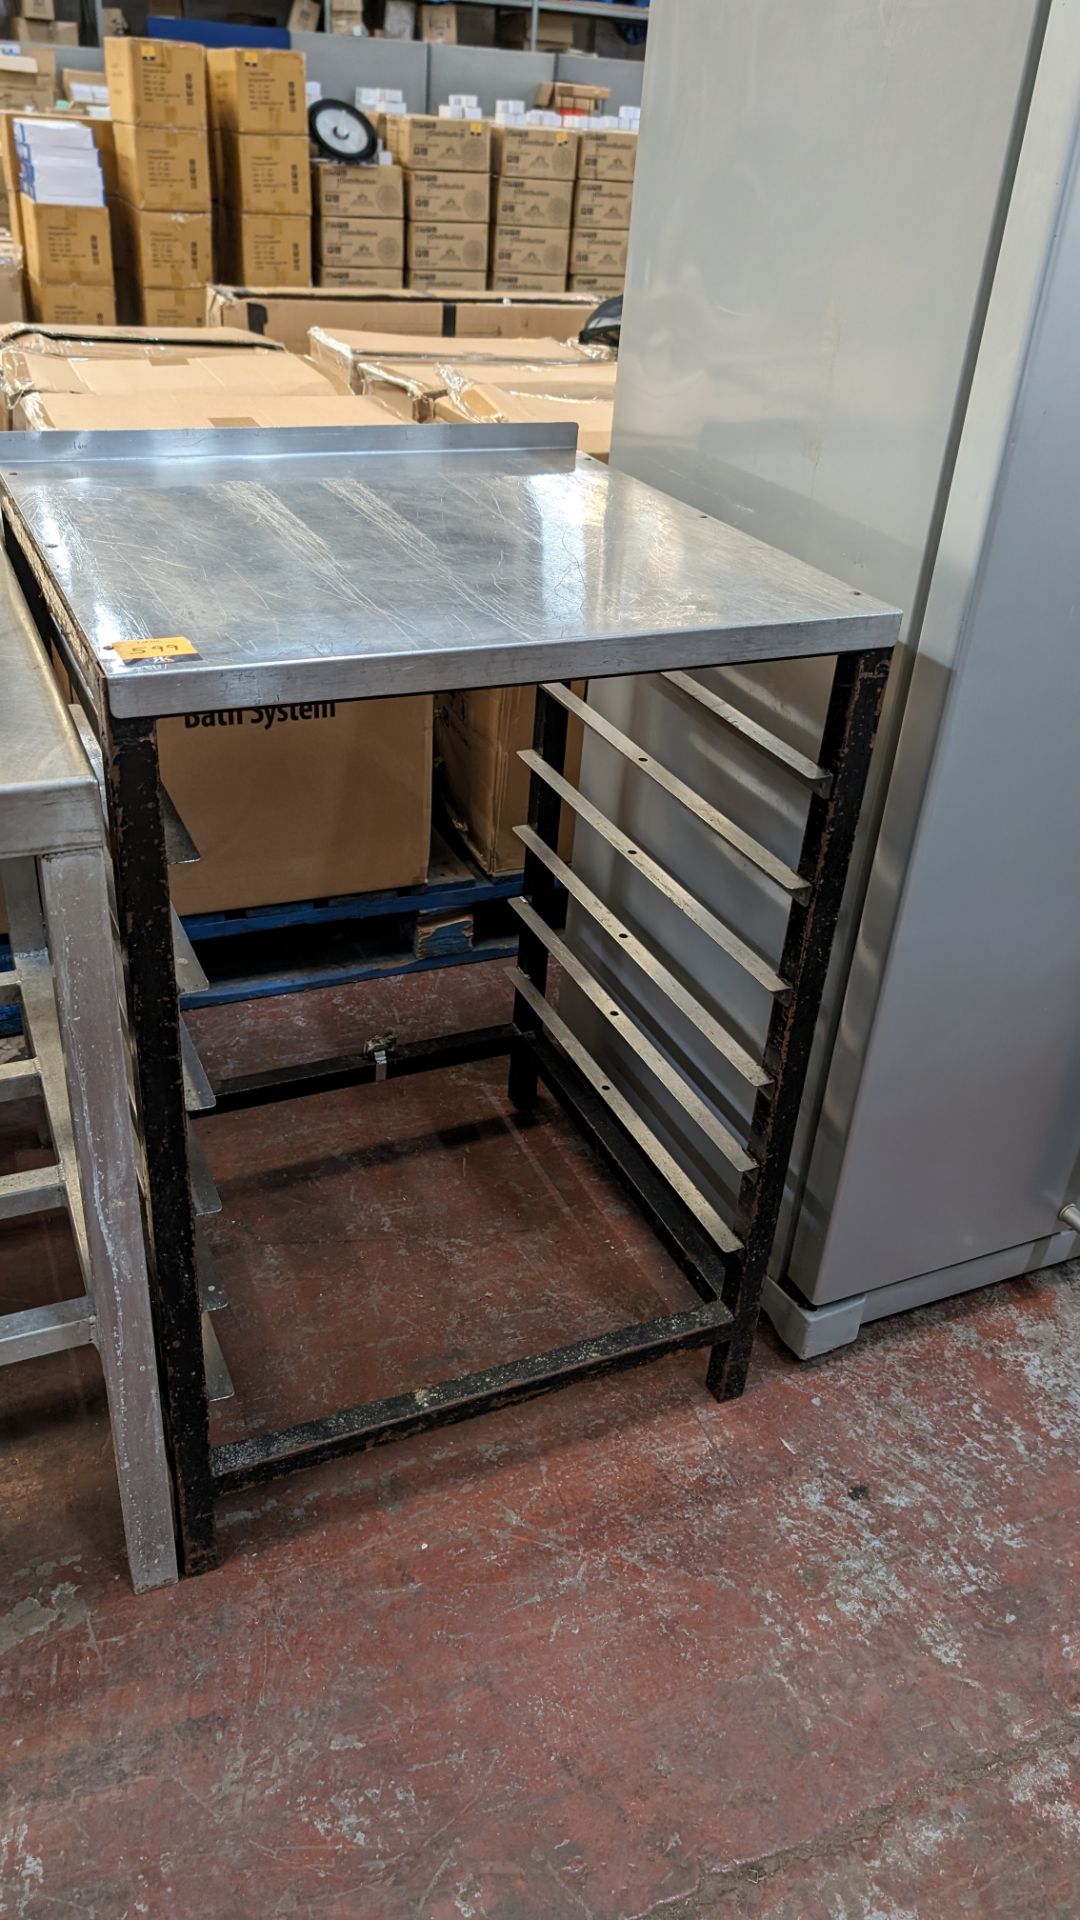 Stainless steel table with capacity for holding trays below, assumed to be for use for commercial di - Bild 2 aus 4